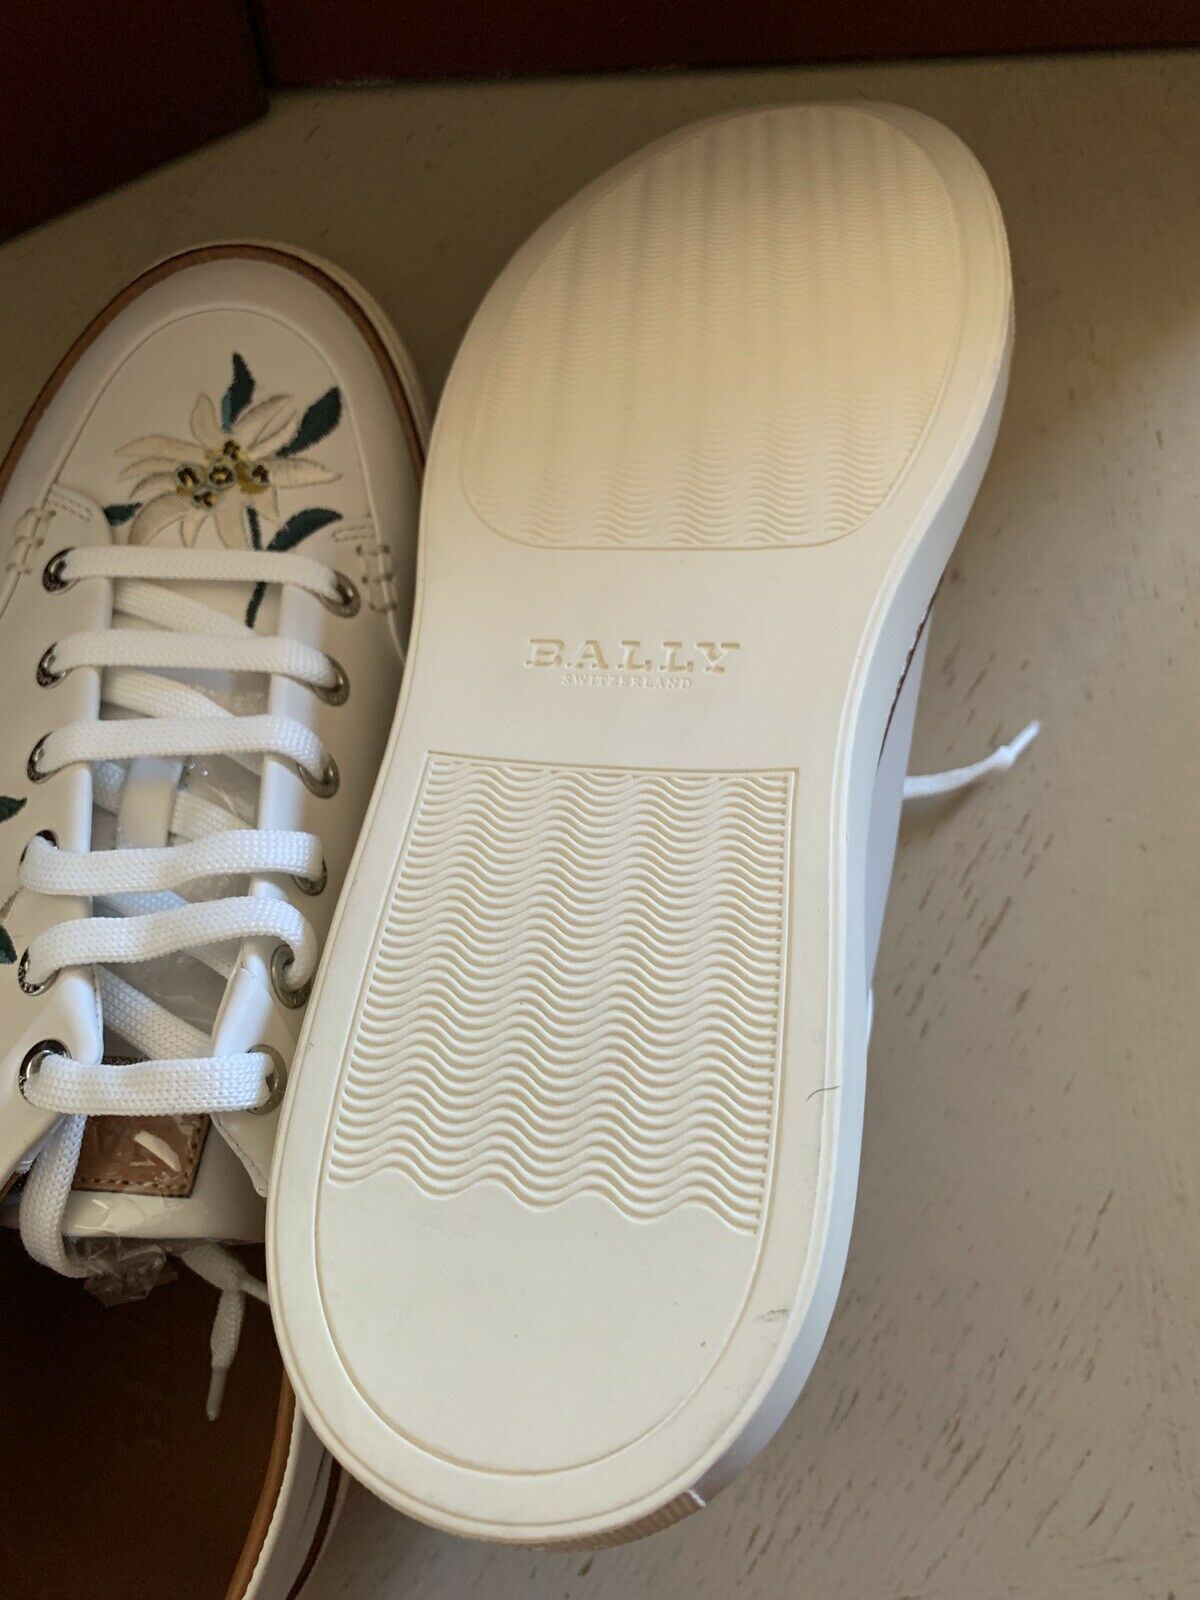 New $650 Bally Men Hernando Leather Sneakers Shoes Color White 13 US Switzerland